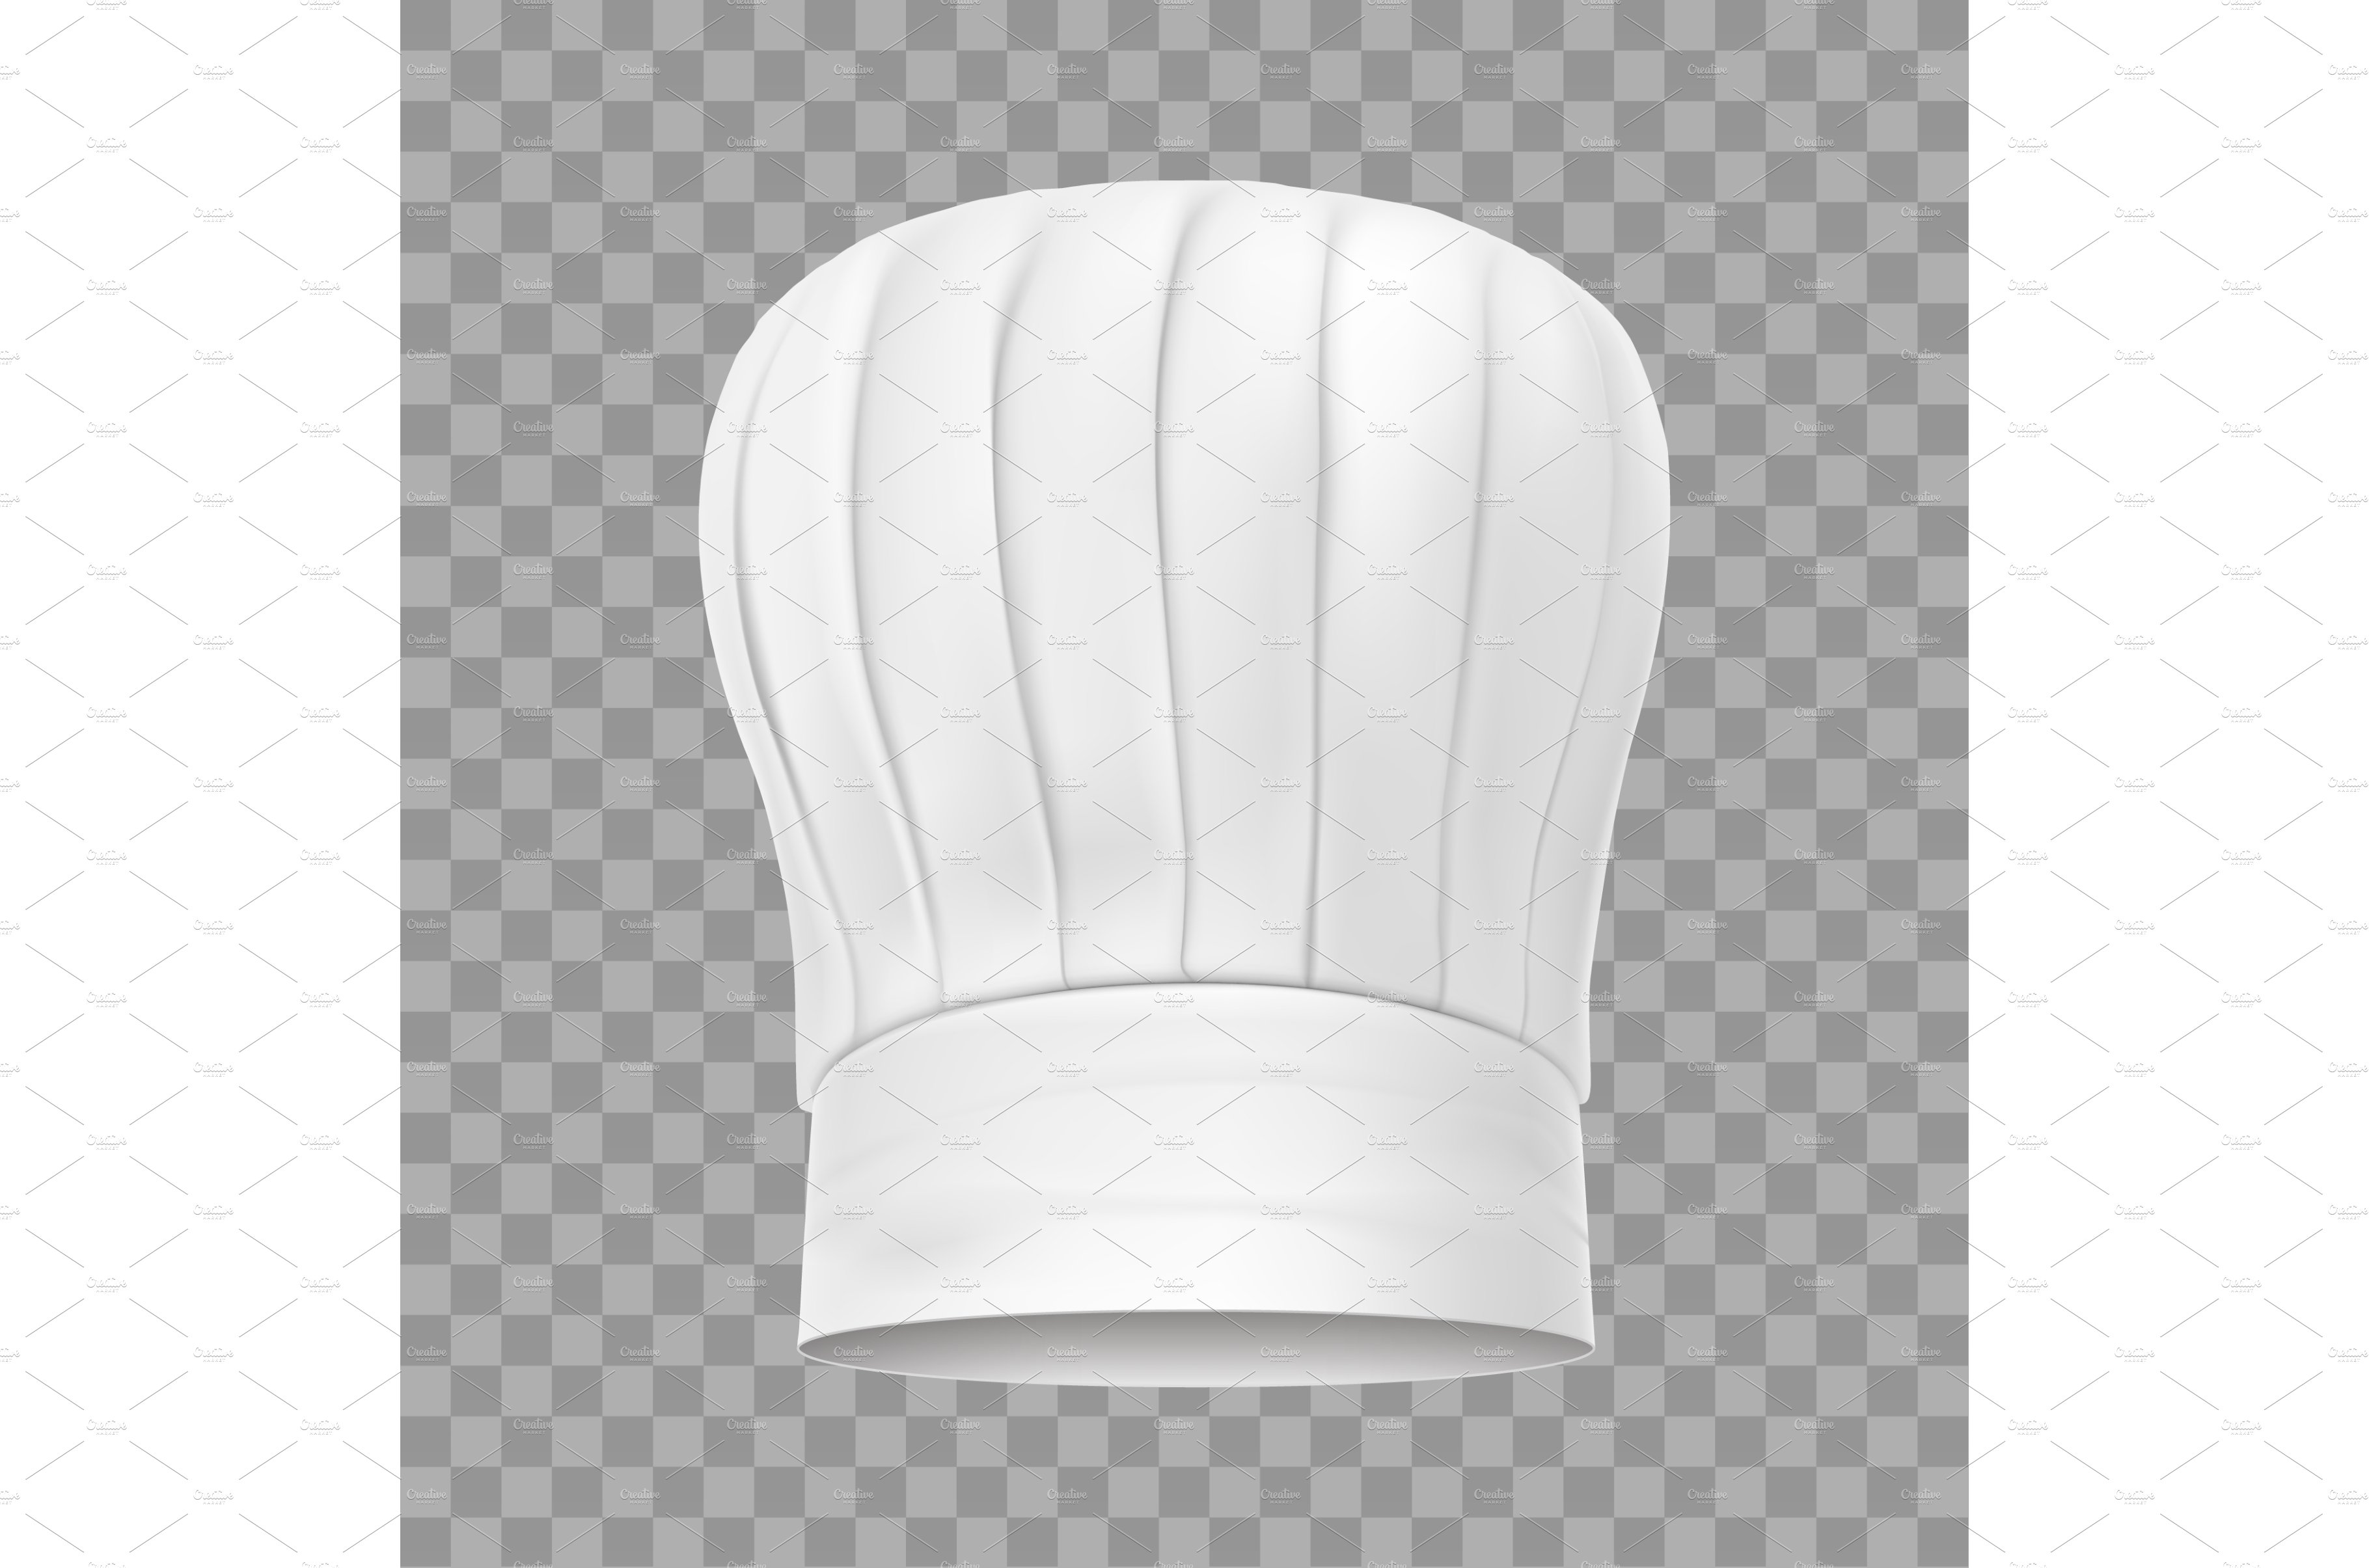 Chef hat with realistic shadow cover image.